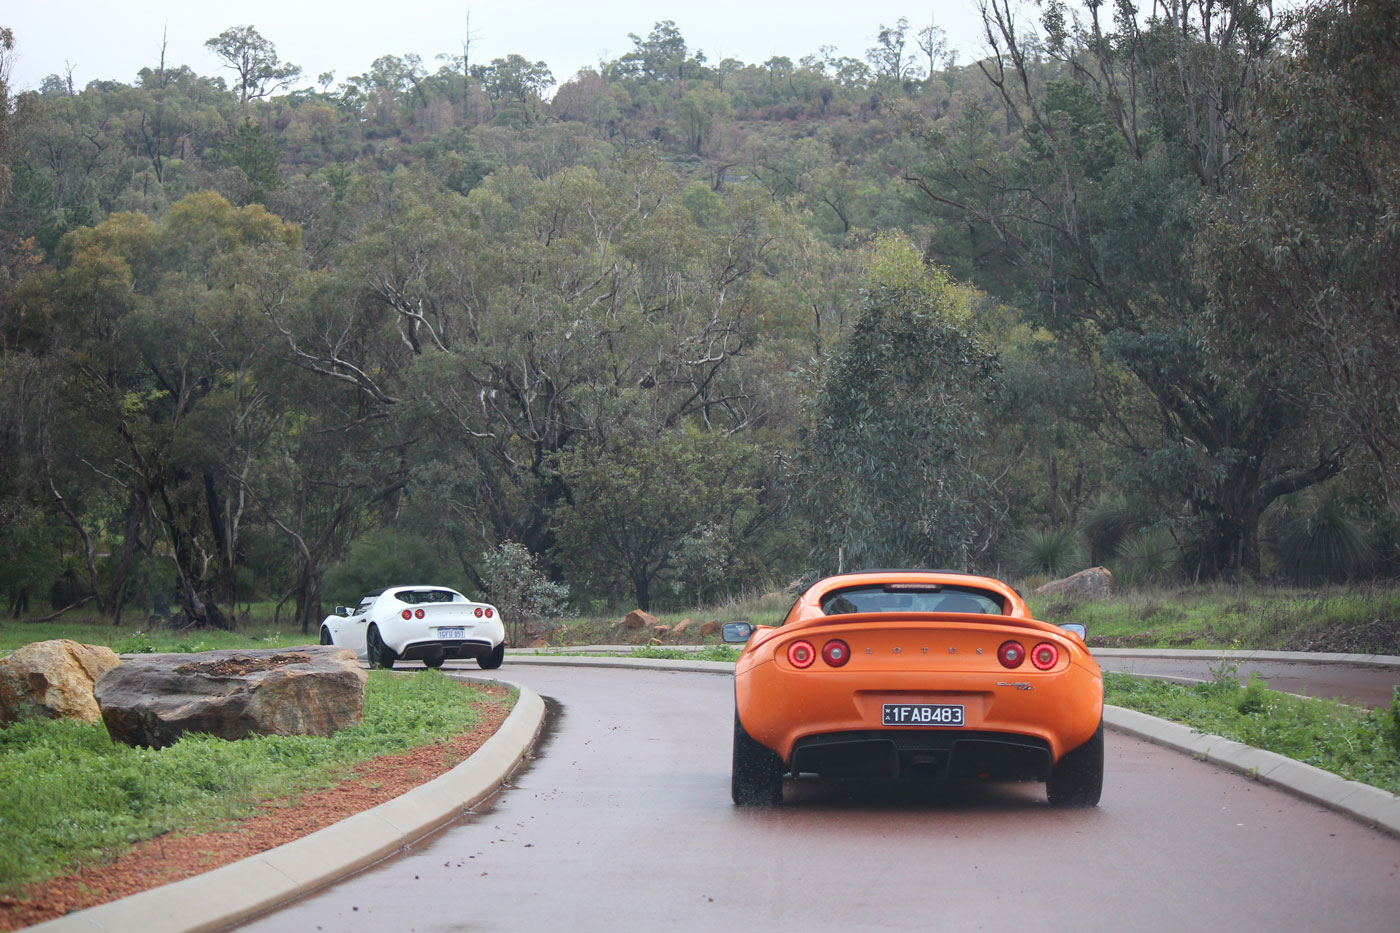 Paul & Steve setting the pace in their S3 Elise's